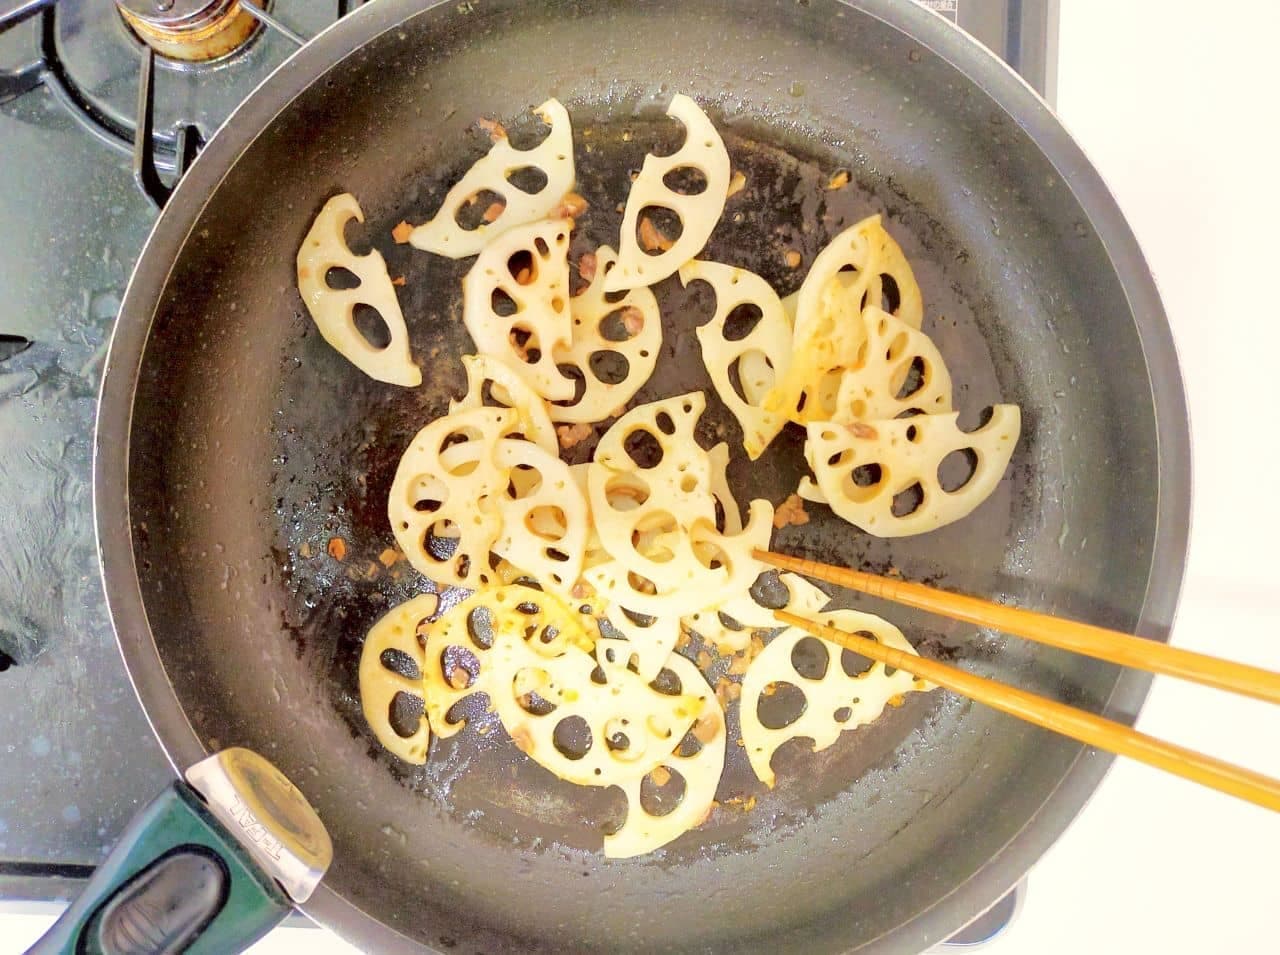 "Lotus root anchovy stir-fried" recipe